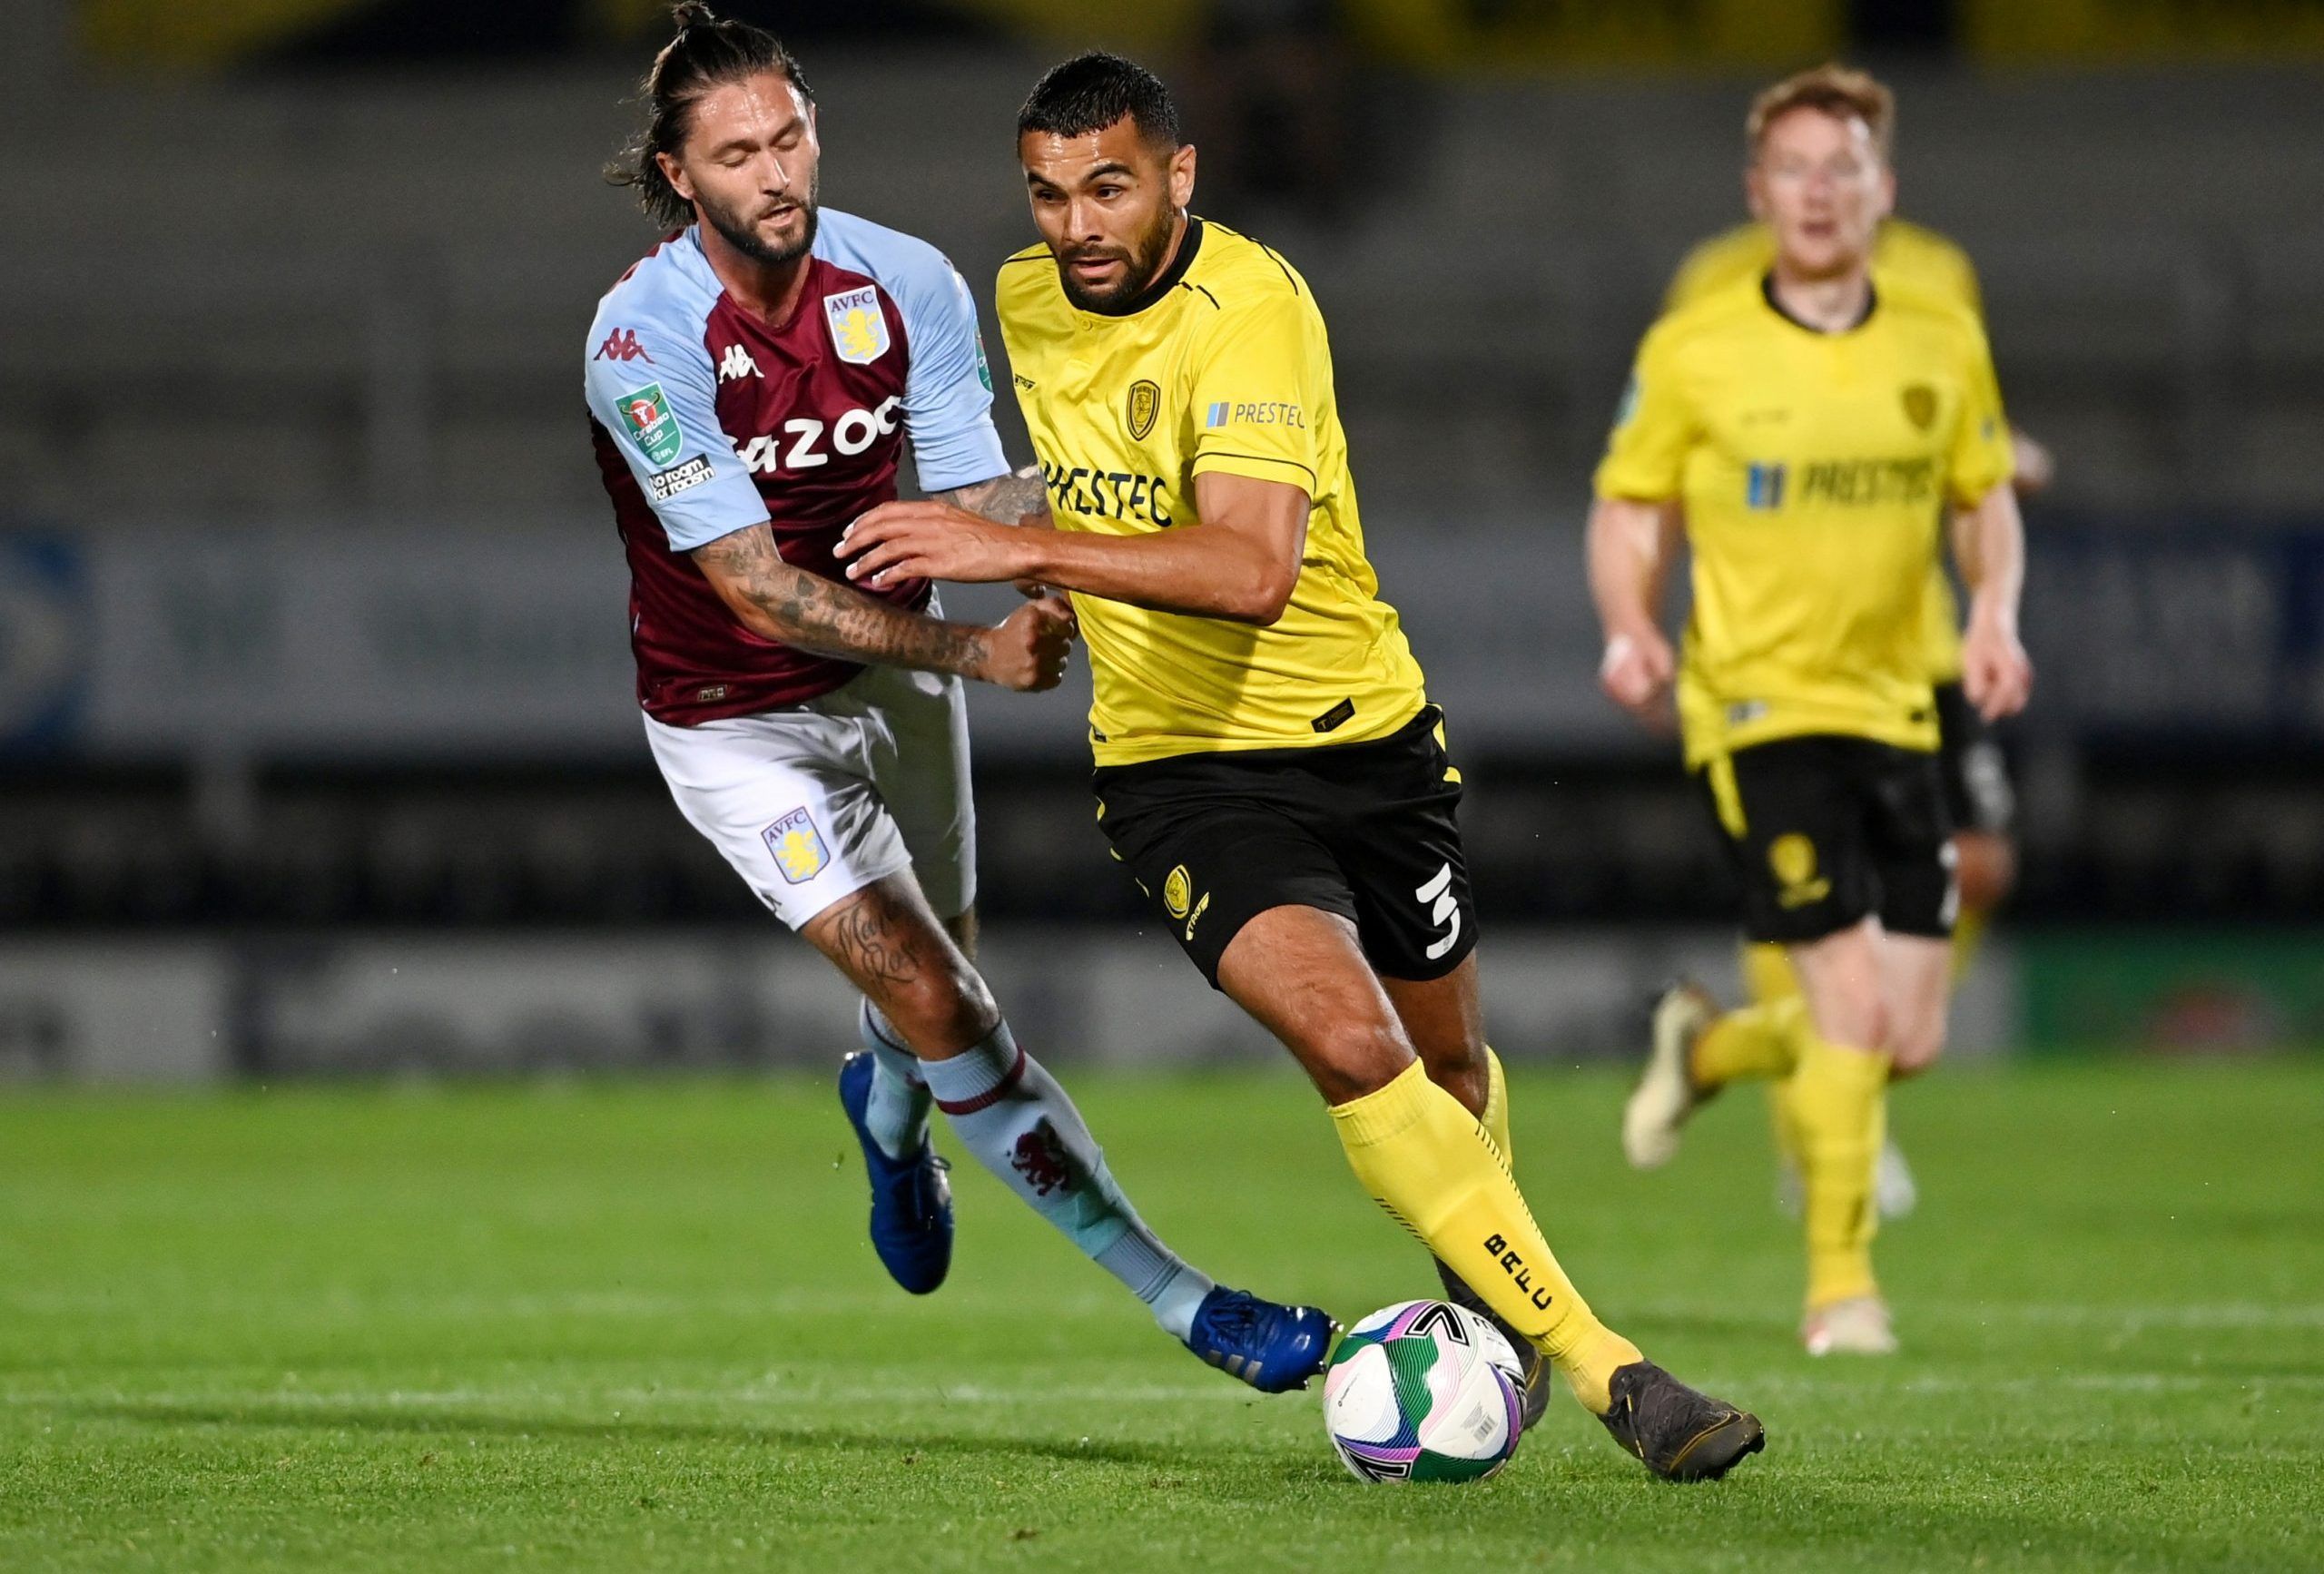 Soccer Football - Carabao Cup Second Round - Burton Albion v Aston Villa - Pirelli Stadium, Burton-on-Trent, Britain - September 15, 2020  Burton Albion's Colin Daniel in action with Aston Villa's Henri Lansbury   Pool via REUTERS/Laurence Griffiths  EDITORIAL USE ONLY. No use with unauthorized audio, video, data, fixture lists, club/league logos or 